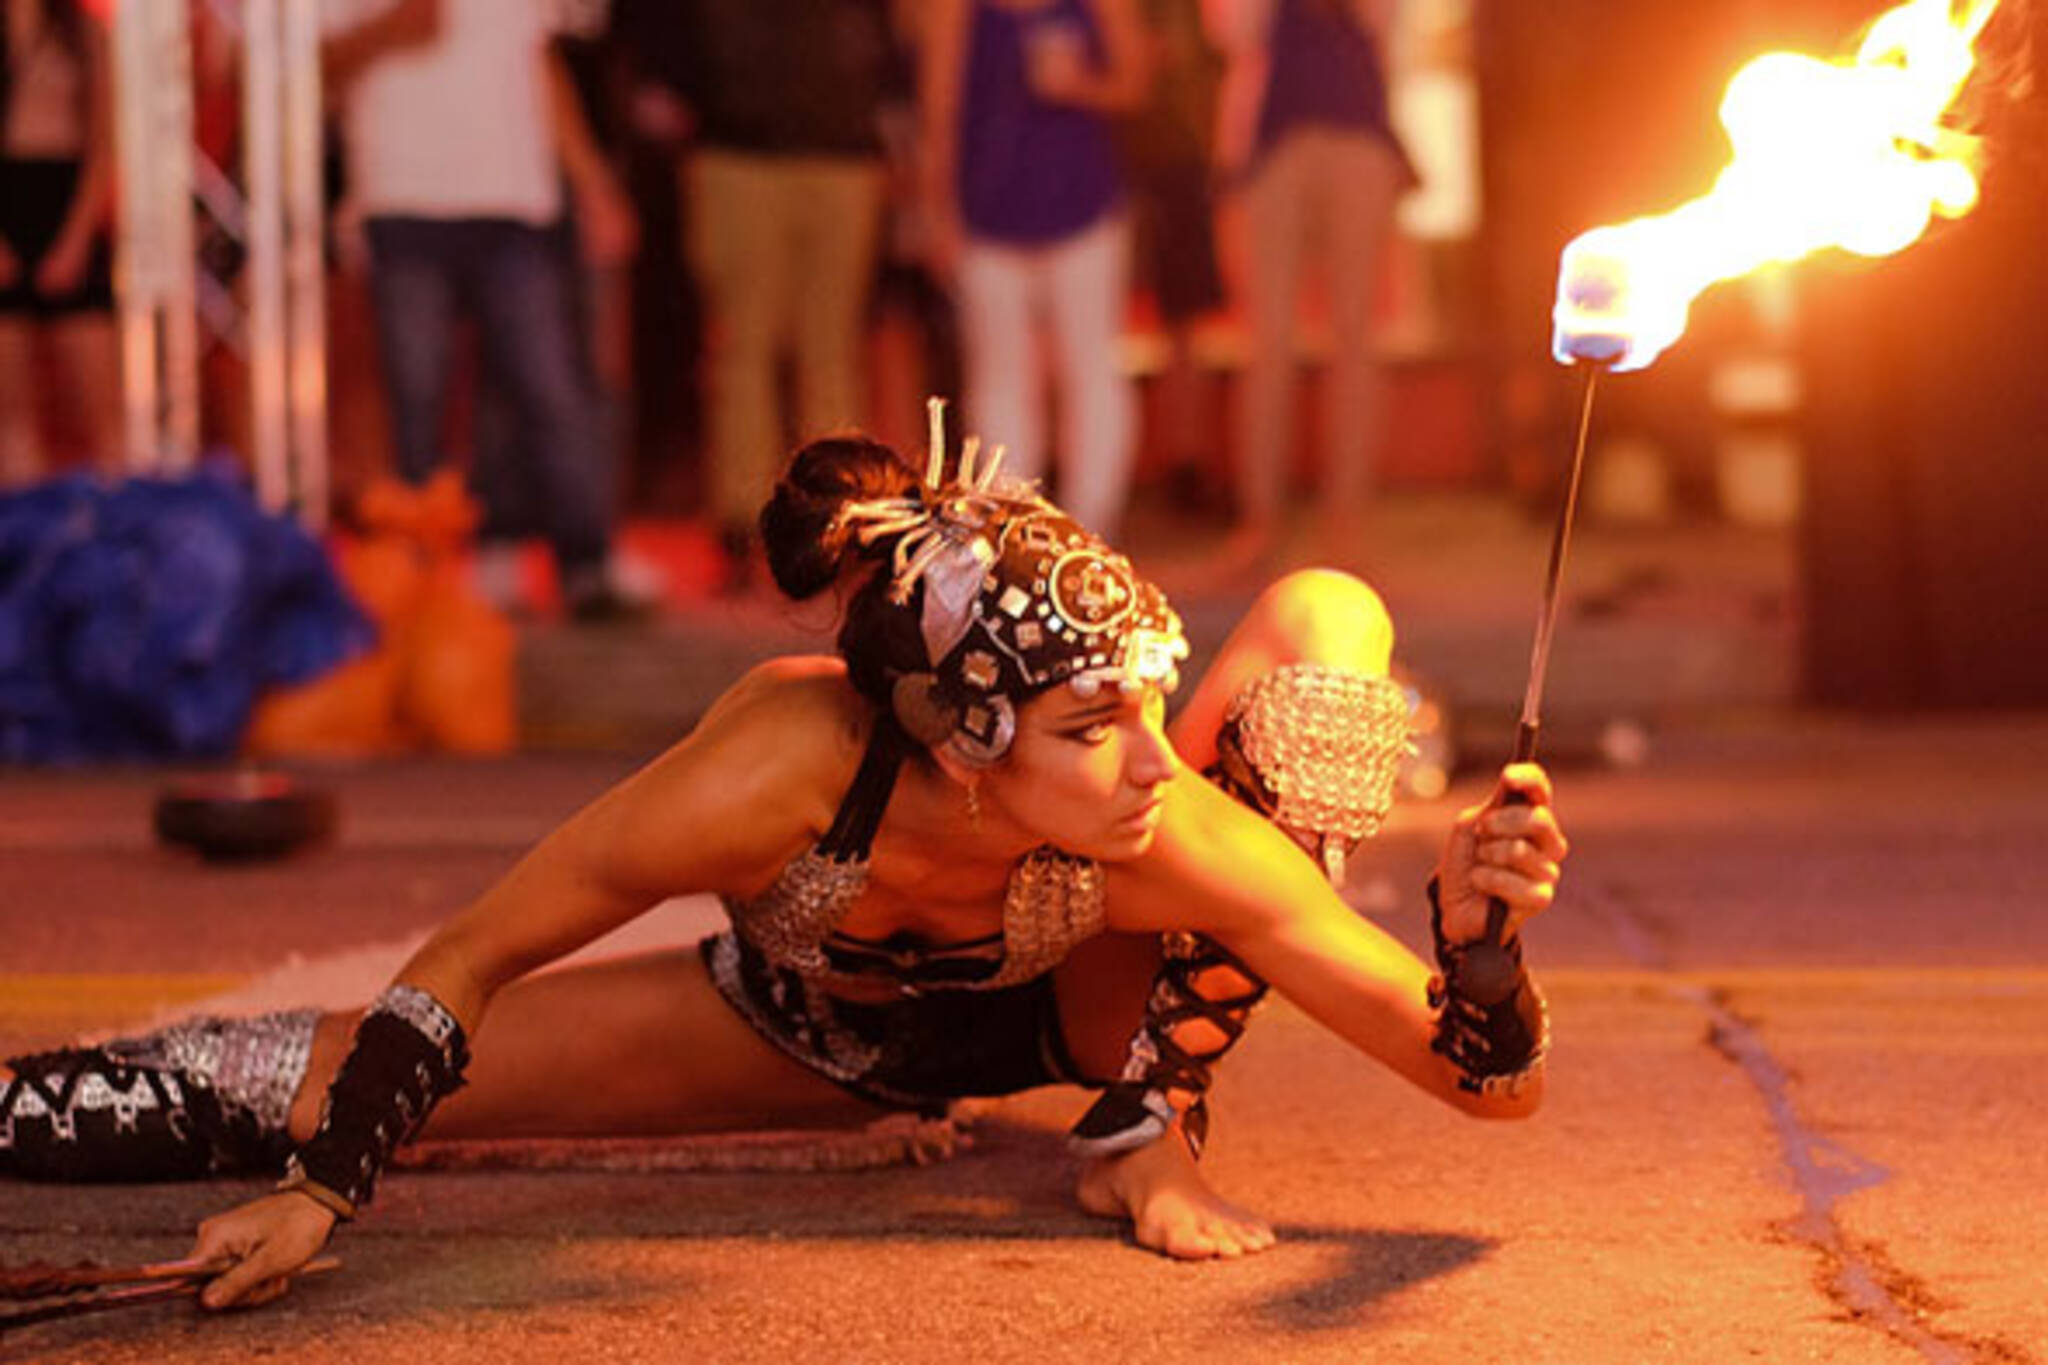 What to expect at Buskerfest 2015